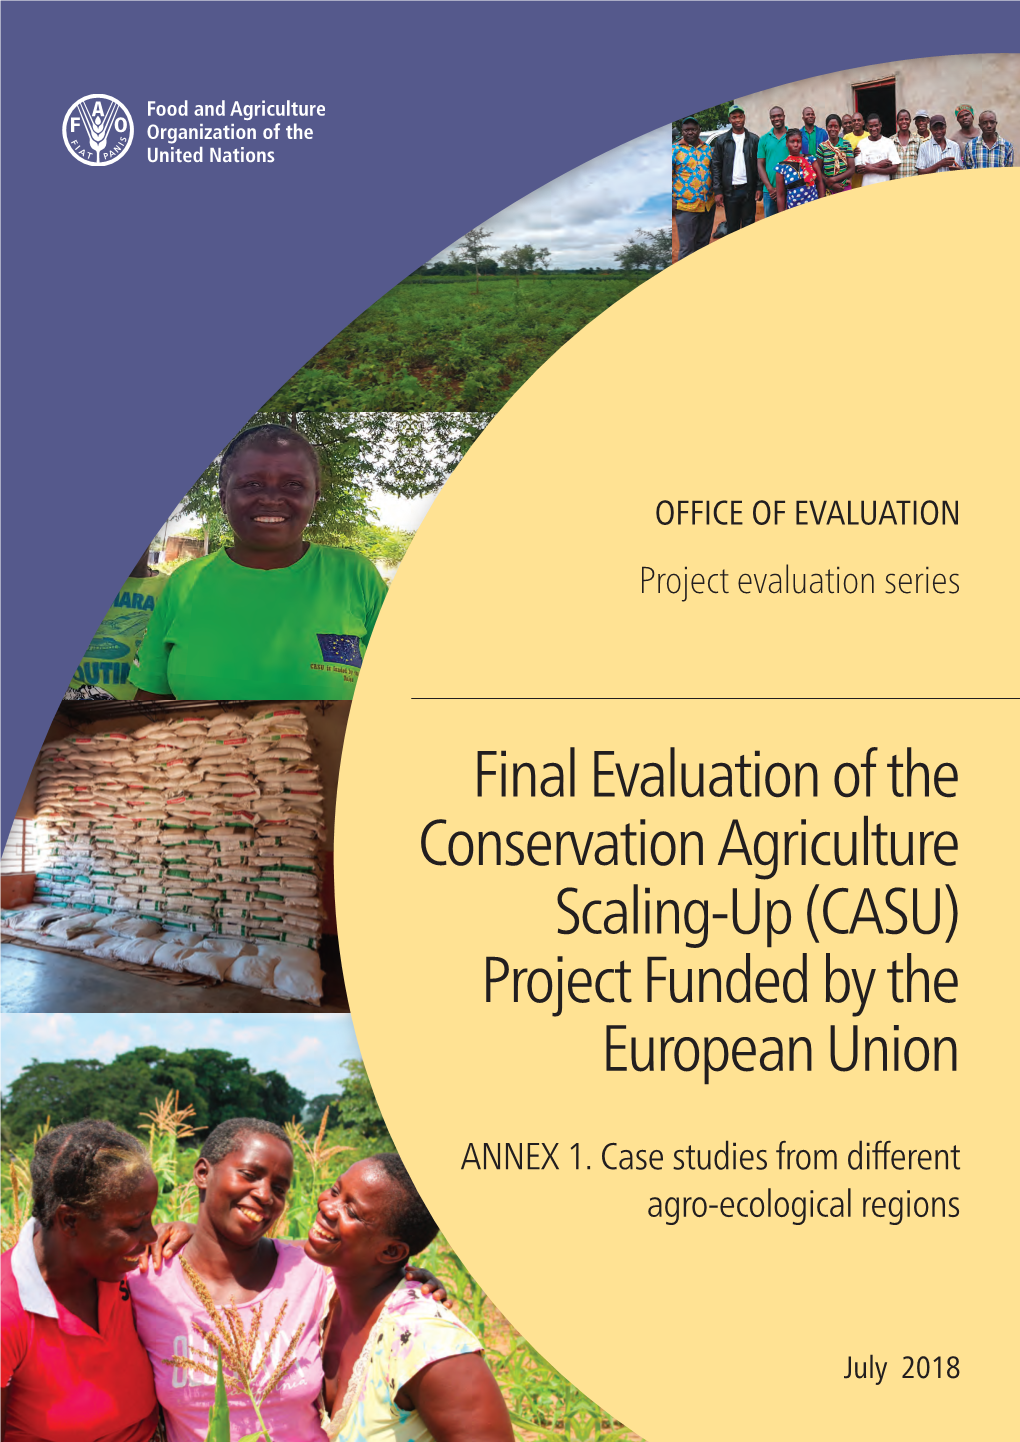 ANNEX 1. Case Studies from Different Agro-Ecological Regions